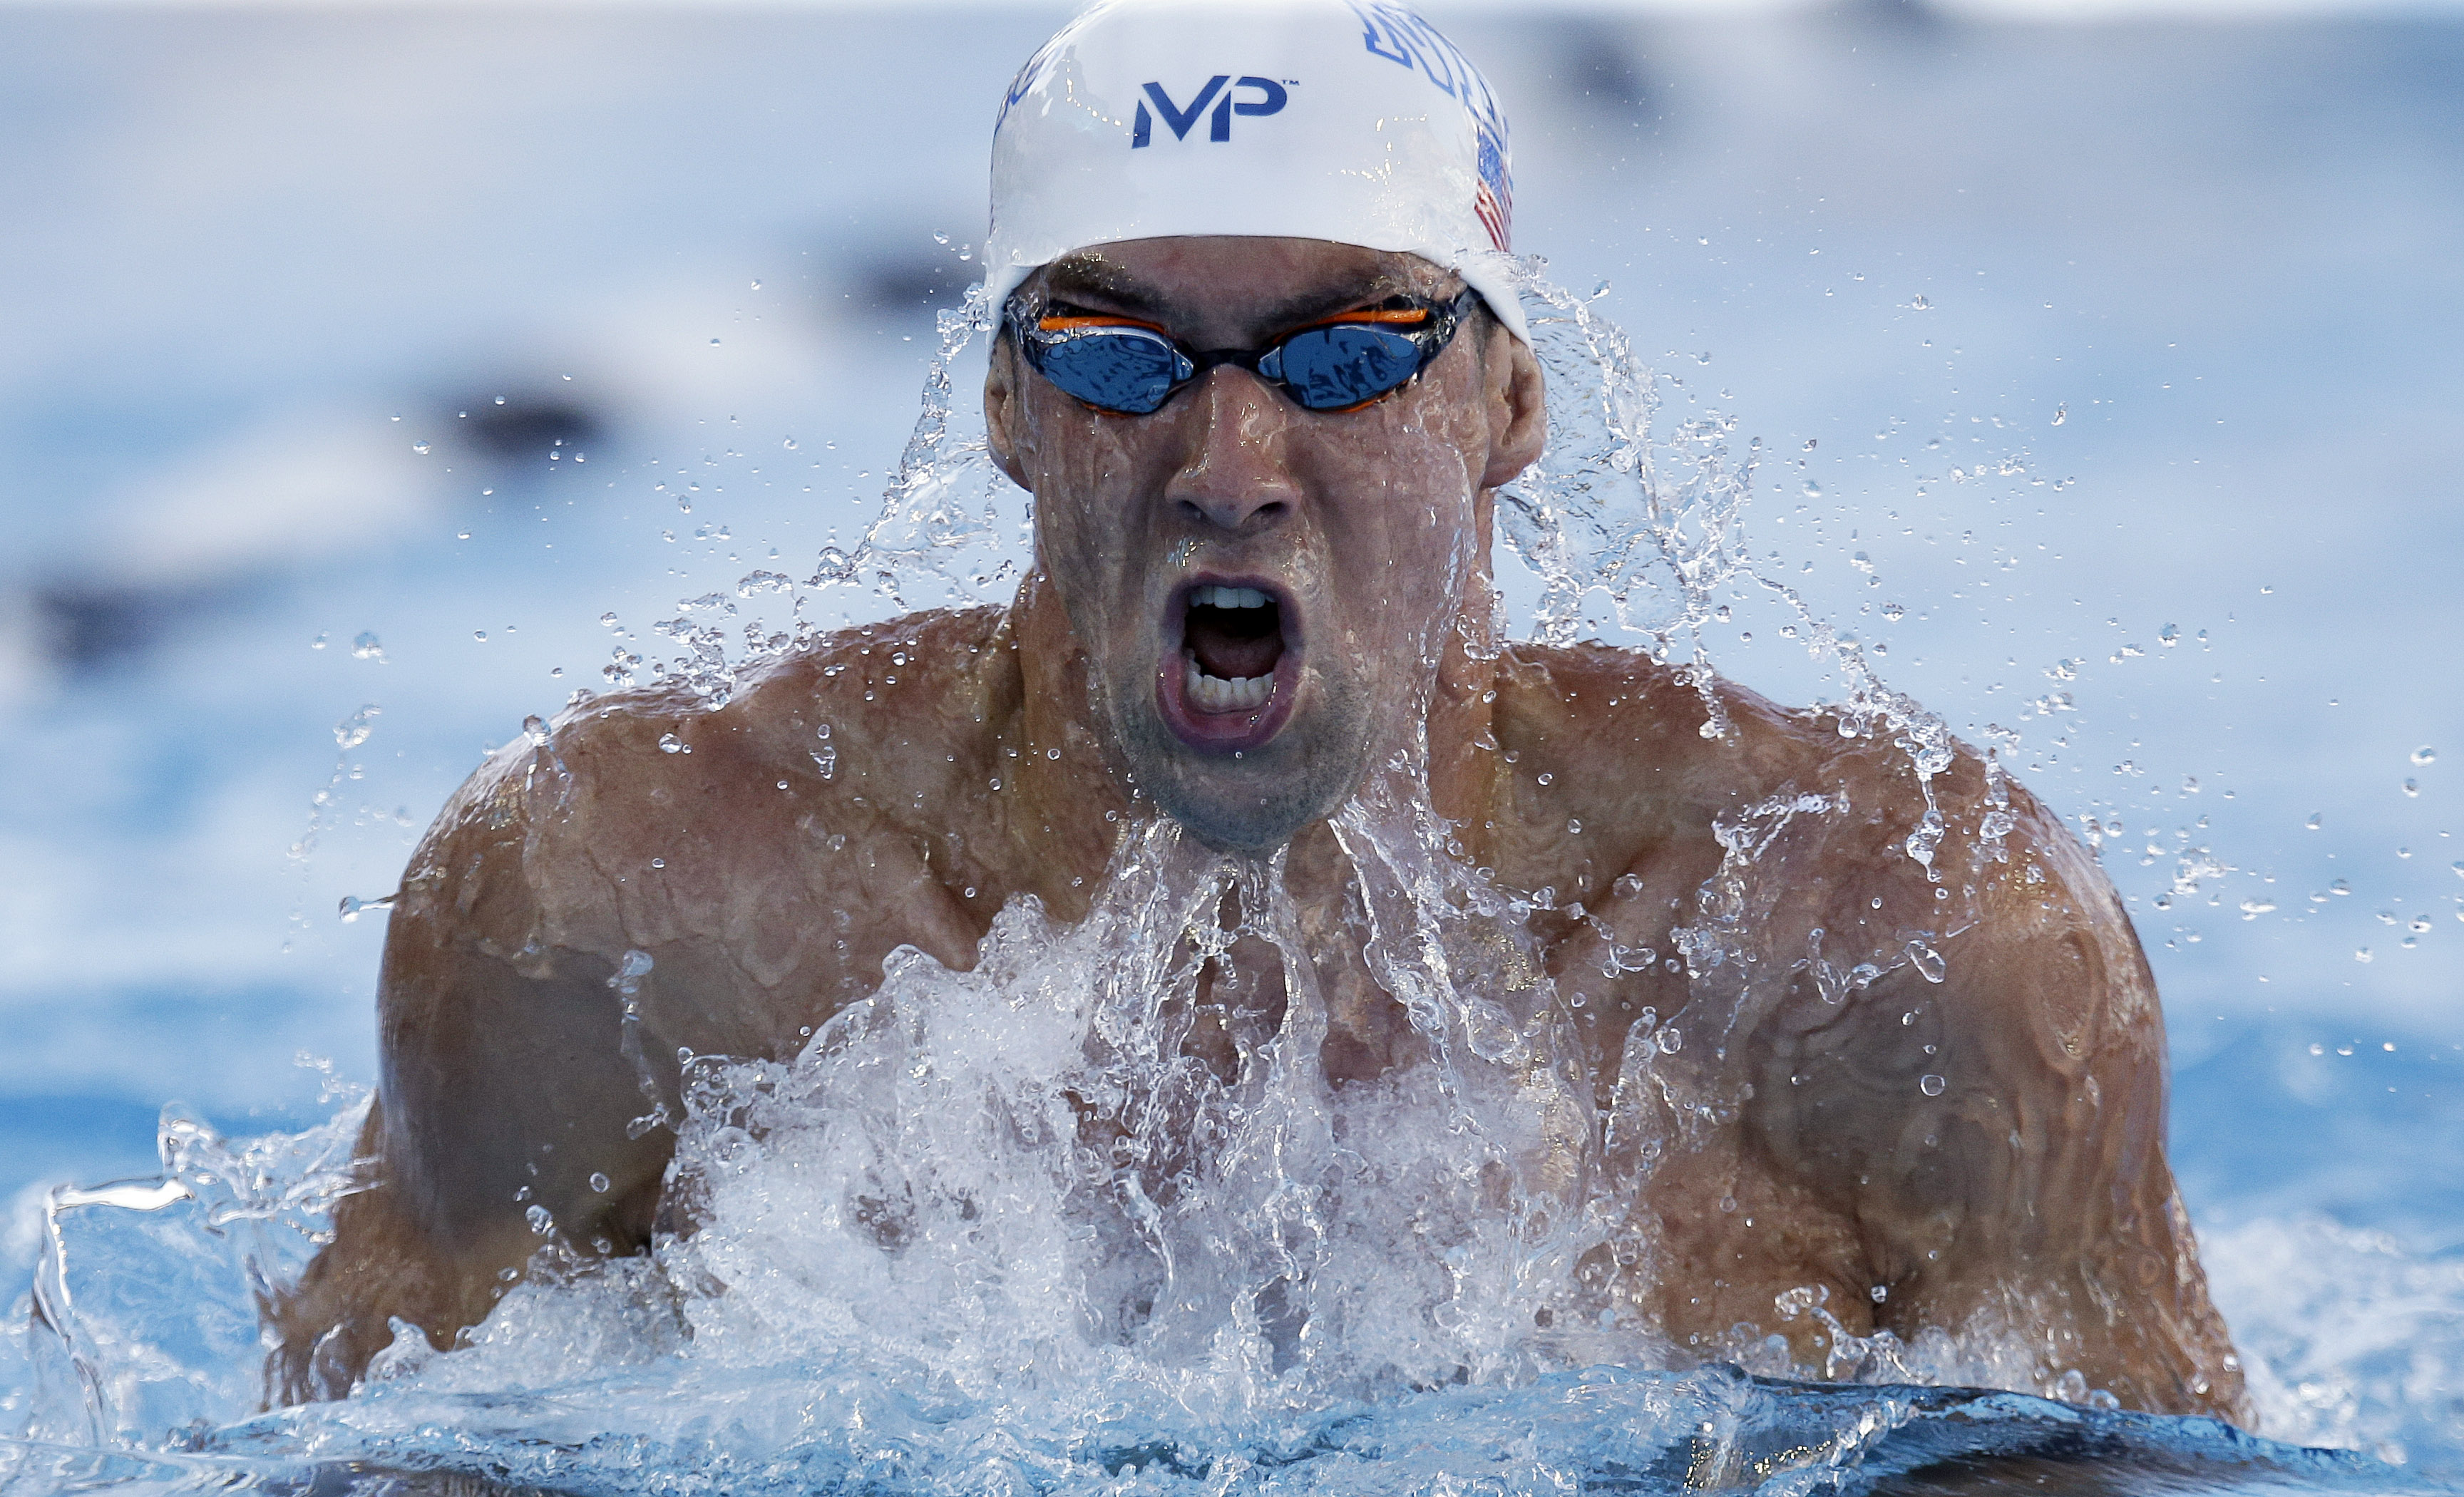 Michael Phelps carves through the water on the breaststroke leg of the 200m individual relay. Photo: AP